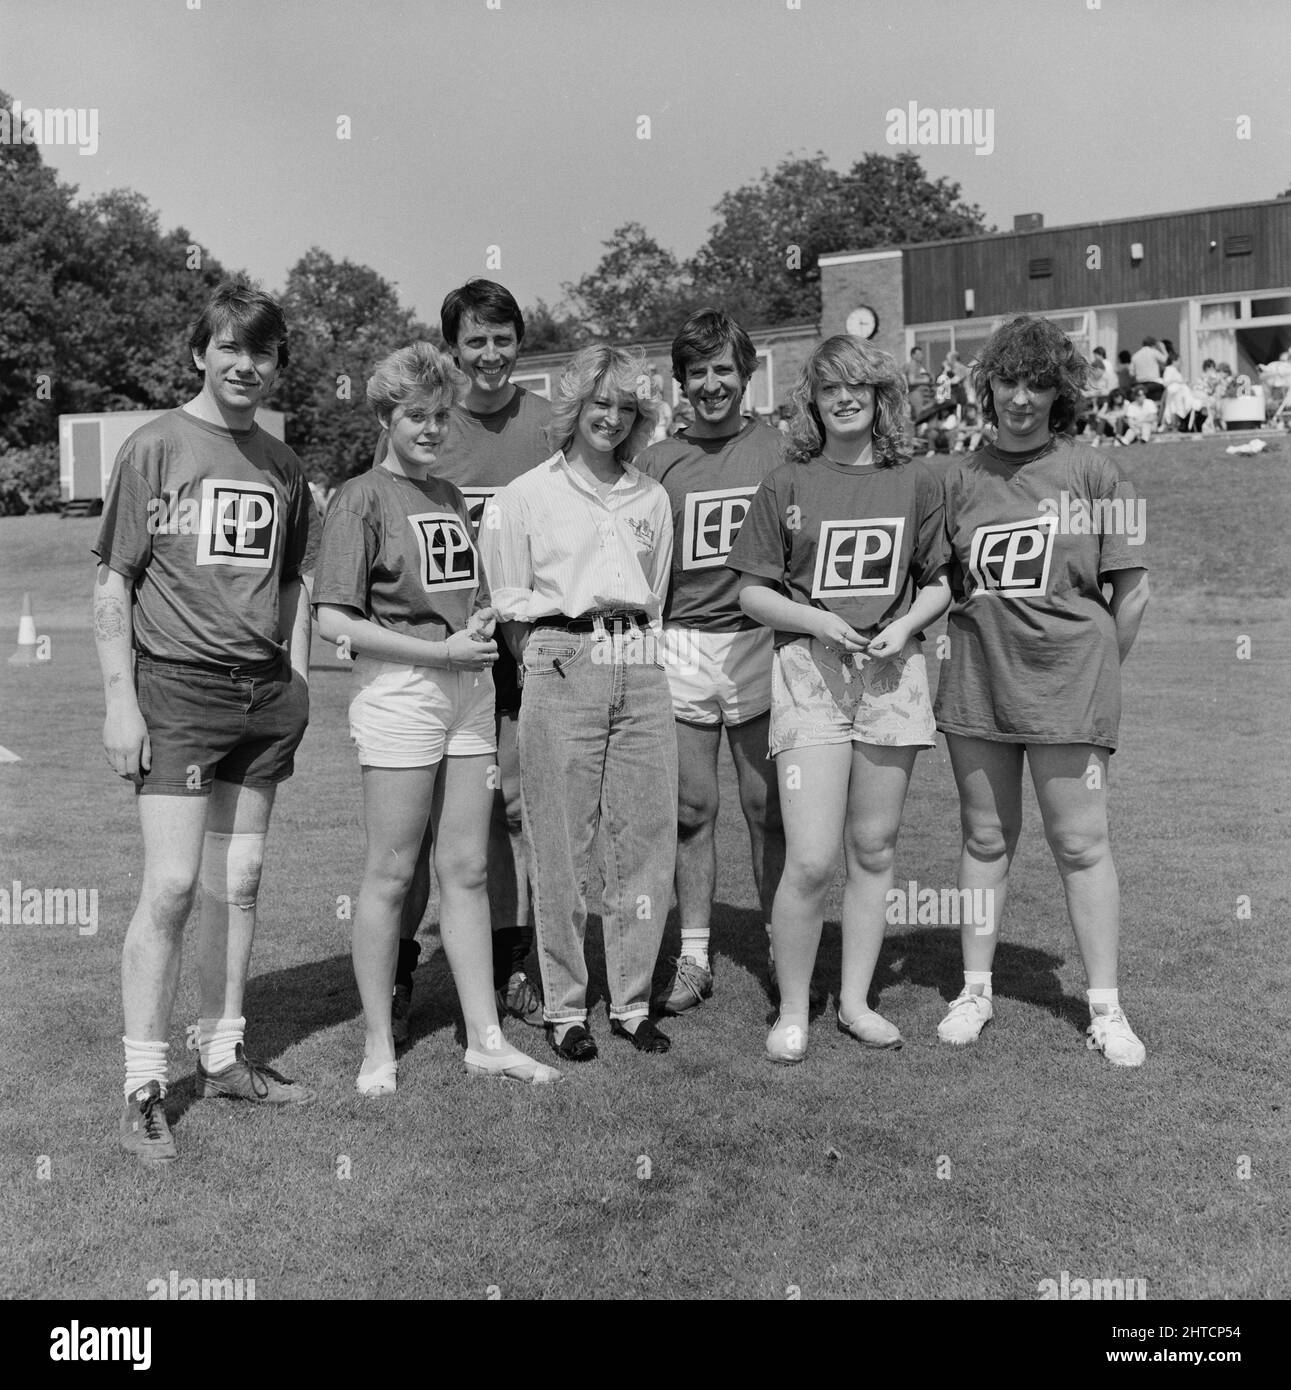 Laing Sports Ground, Rowley Lane, Elstree, Barnet, London, 20/06/1987. The EPL 'Somnambulists' team in the 'It's a Knockout' style competition posing with the Eastenders actor Gillian Taylforth at the 1987 Family Day at Laing's Sports Ground. Attractions at that year's Family Day included; hot air balloon rides, helicopter rides, a bouncy castle and fairground rides, stalls, an 'It's a Knockout' style competition and tennis and six-a-side football tournaments.  Cast members from Eastenders made a guest appearance and entered a side in the football competition.  Six teams entered the 'It's a Kn Stock Photo